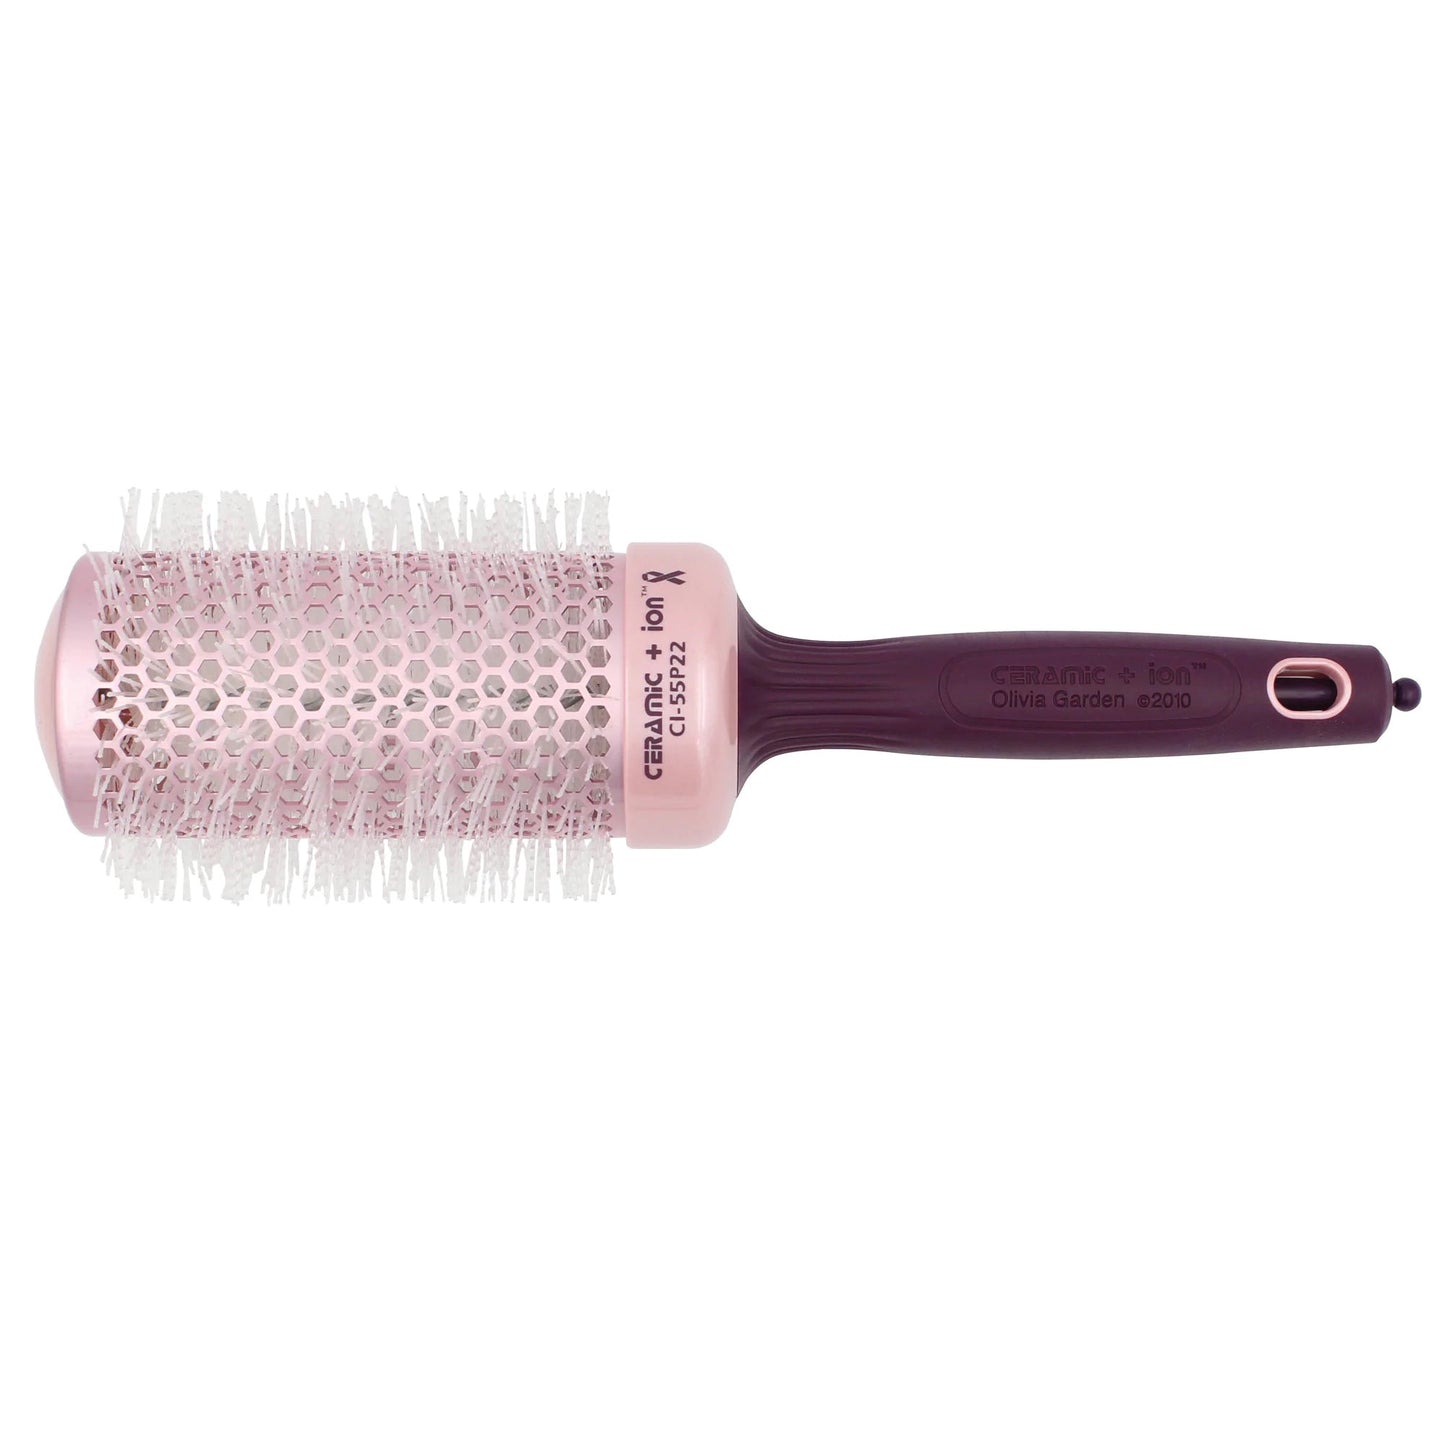 CI-55P22 | 2 1/8" | 2022 Breast Cancer Awareness Special Edition | OLIVIA GARDEN COMBS & BRUSHES OLIVIA GARDEN 